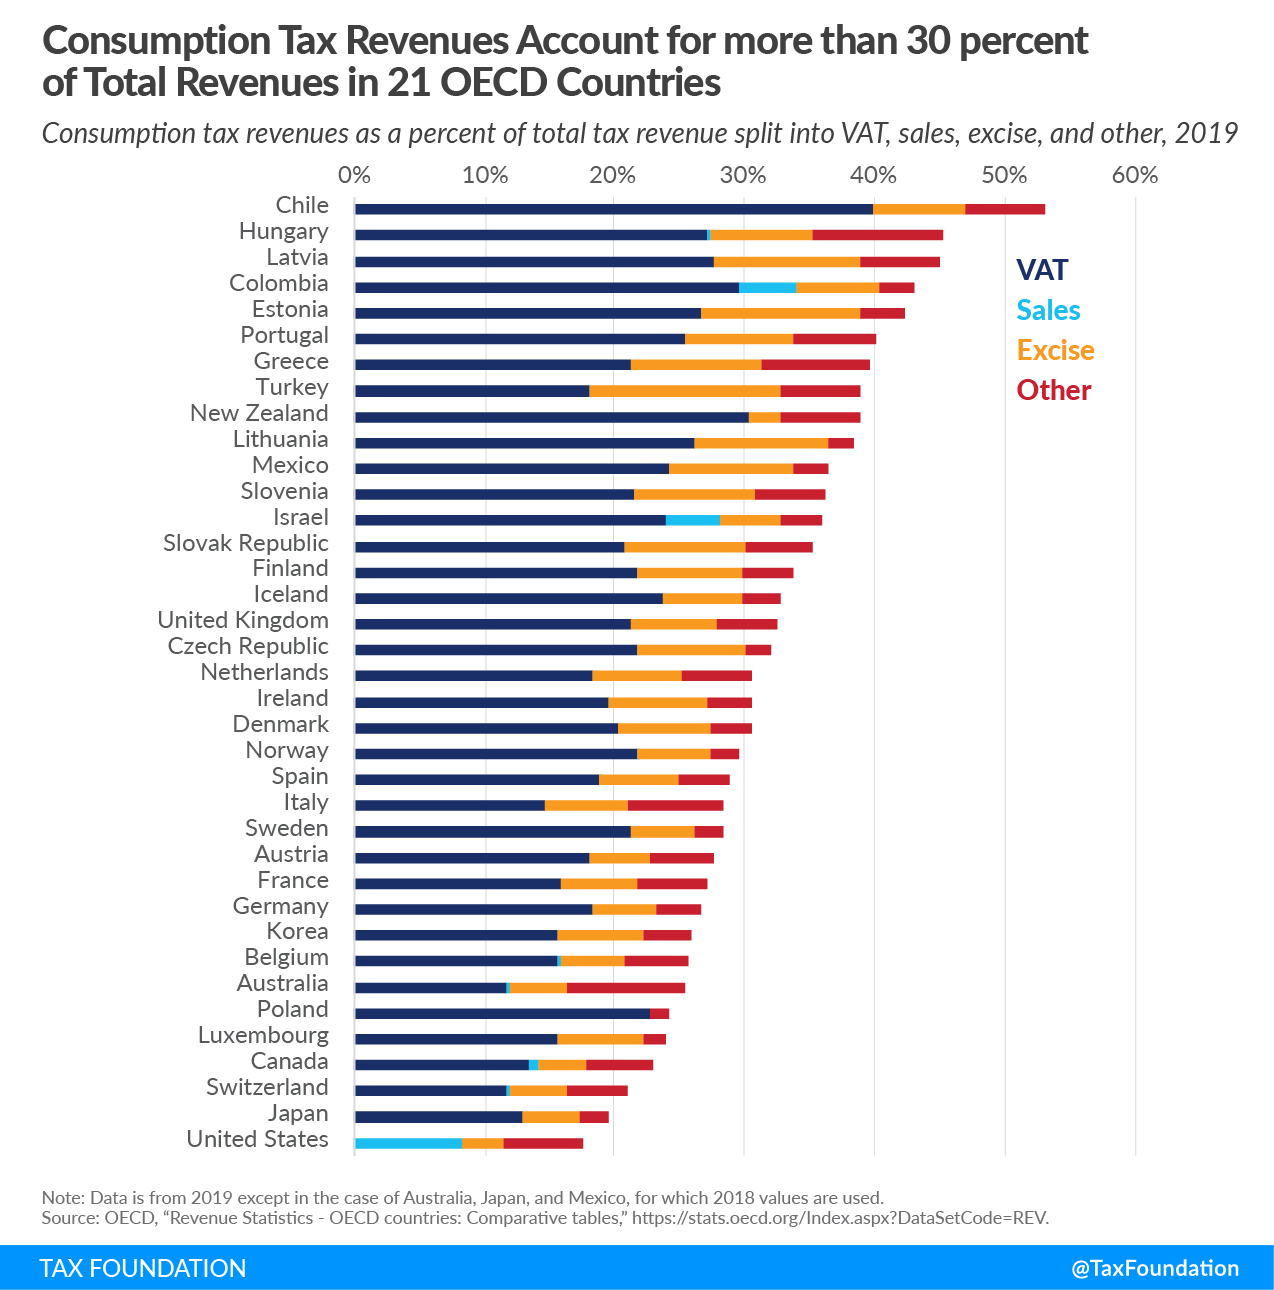 Consumption Tax Revenues Account for more than 30 percent of Total Revenues in 21 OECD Countries Consumption taxes in the OECD consumption tax trends, Sales tax vs. VAT. Excise tax trends